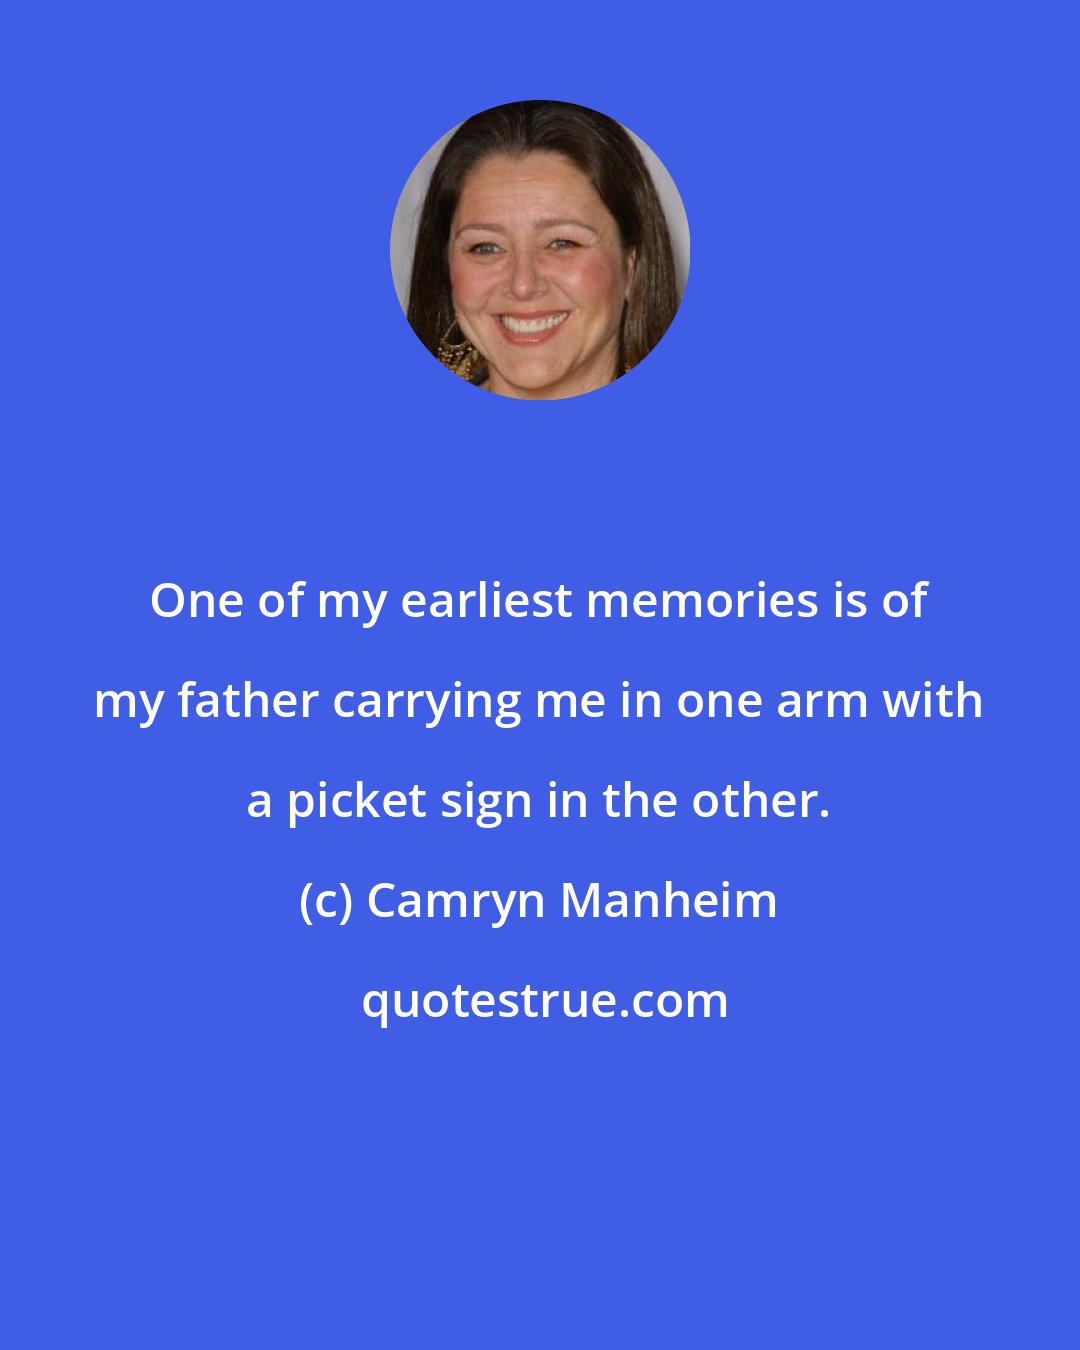 Camryn Manheim: One of my earliest memories is of my father carrying me in one arm with a picket sign in the other.